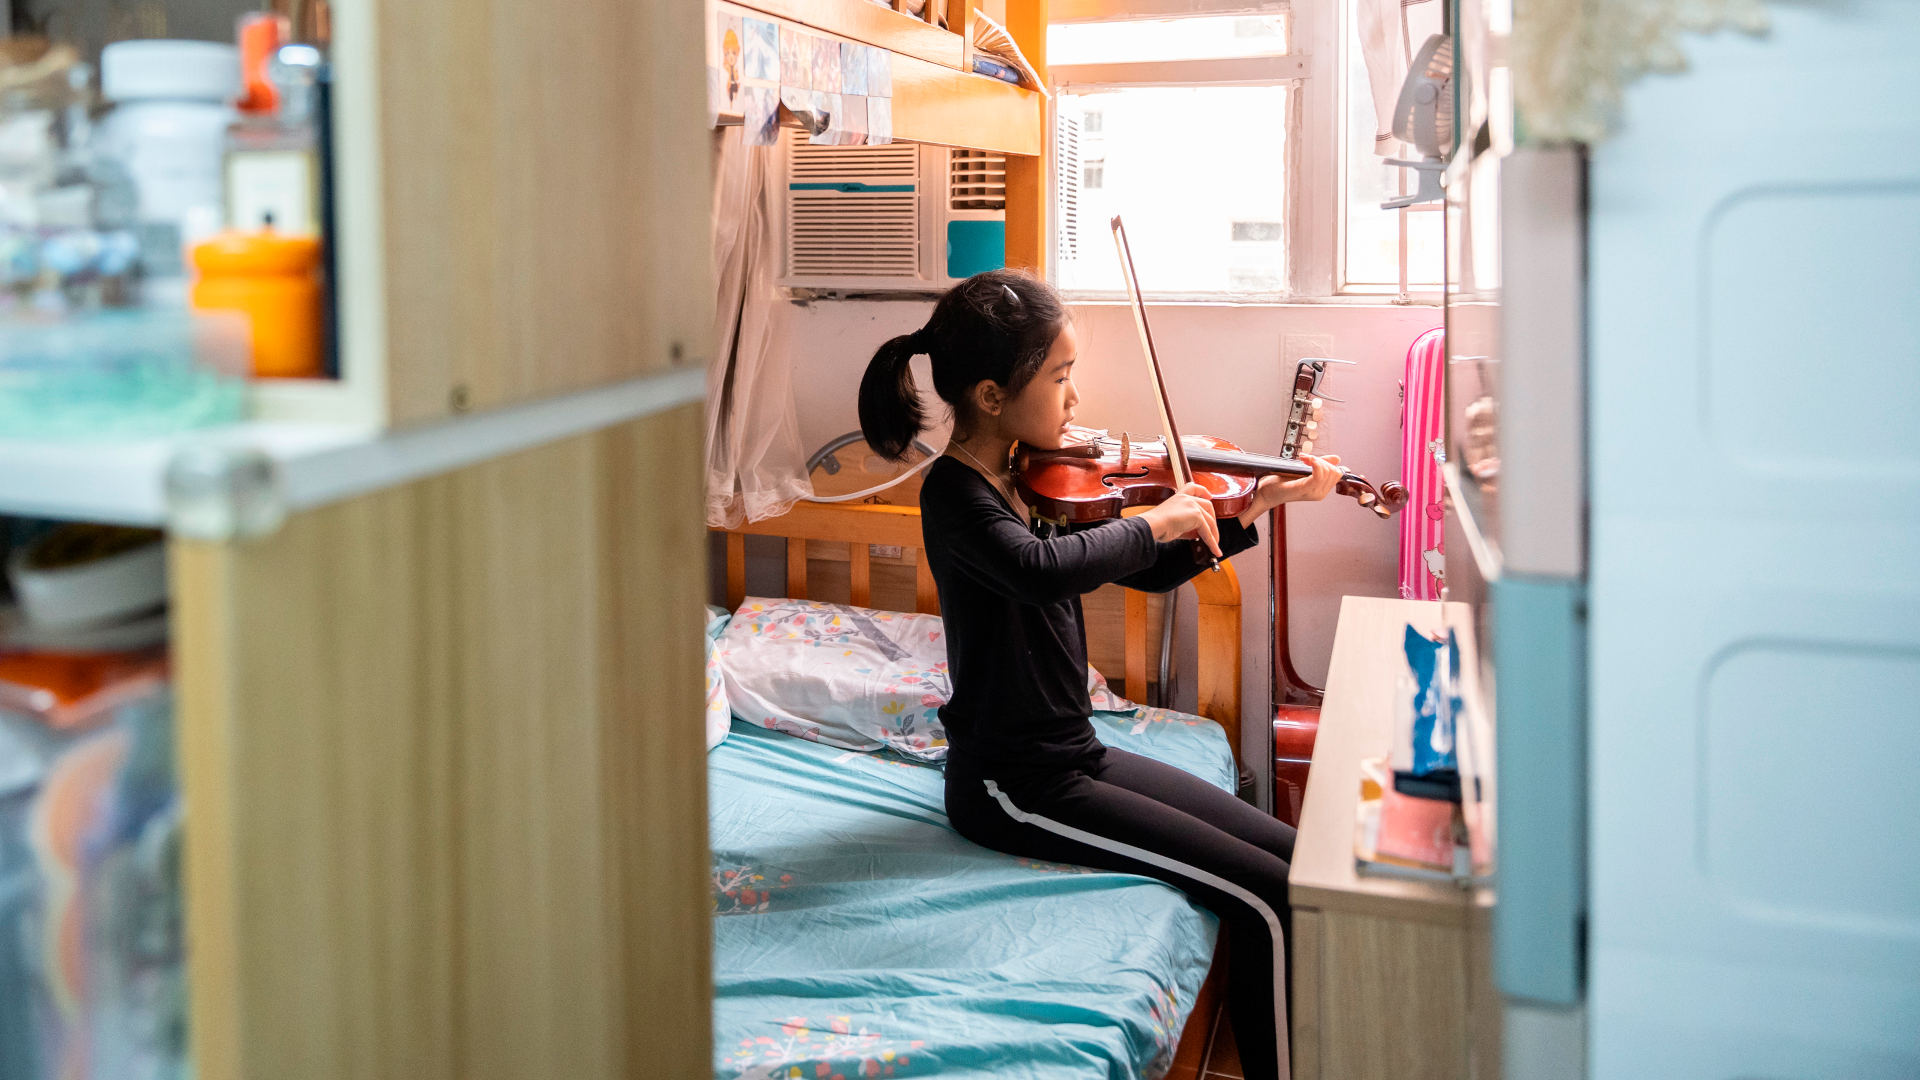 Morning Wan's daughter, now 8 years old, plays violin in the family's small subdivided flat in the Sham Shui Po area of Hong Kong. A lack of proper kitchen facilities in the apartment makes it difficult to cook, affecting the family's diet.